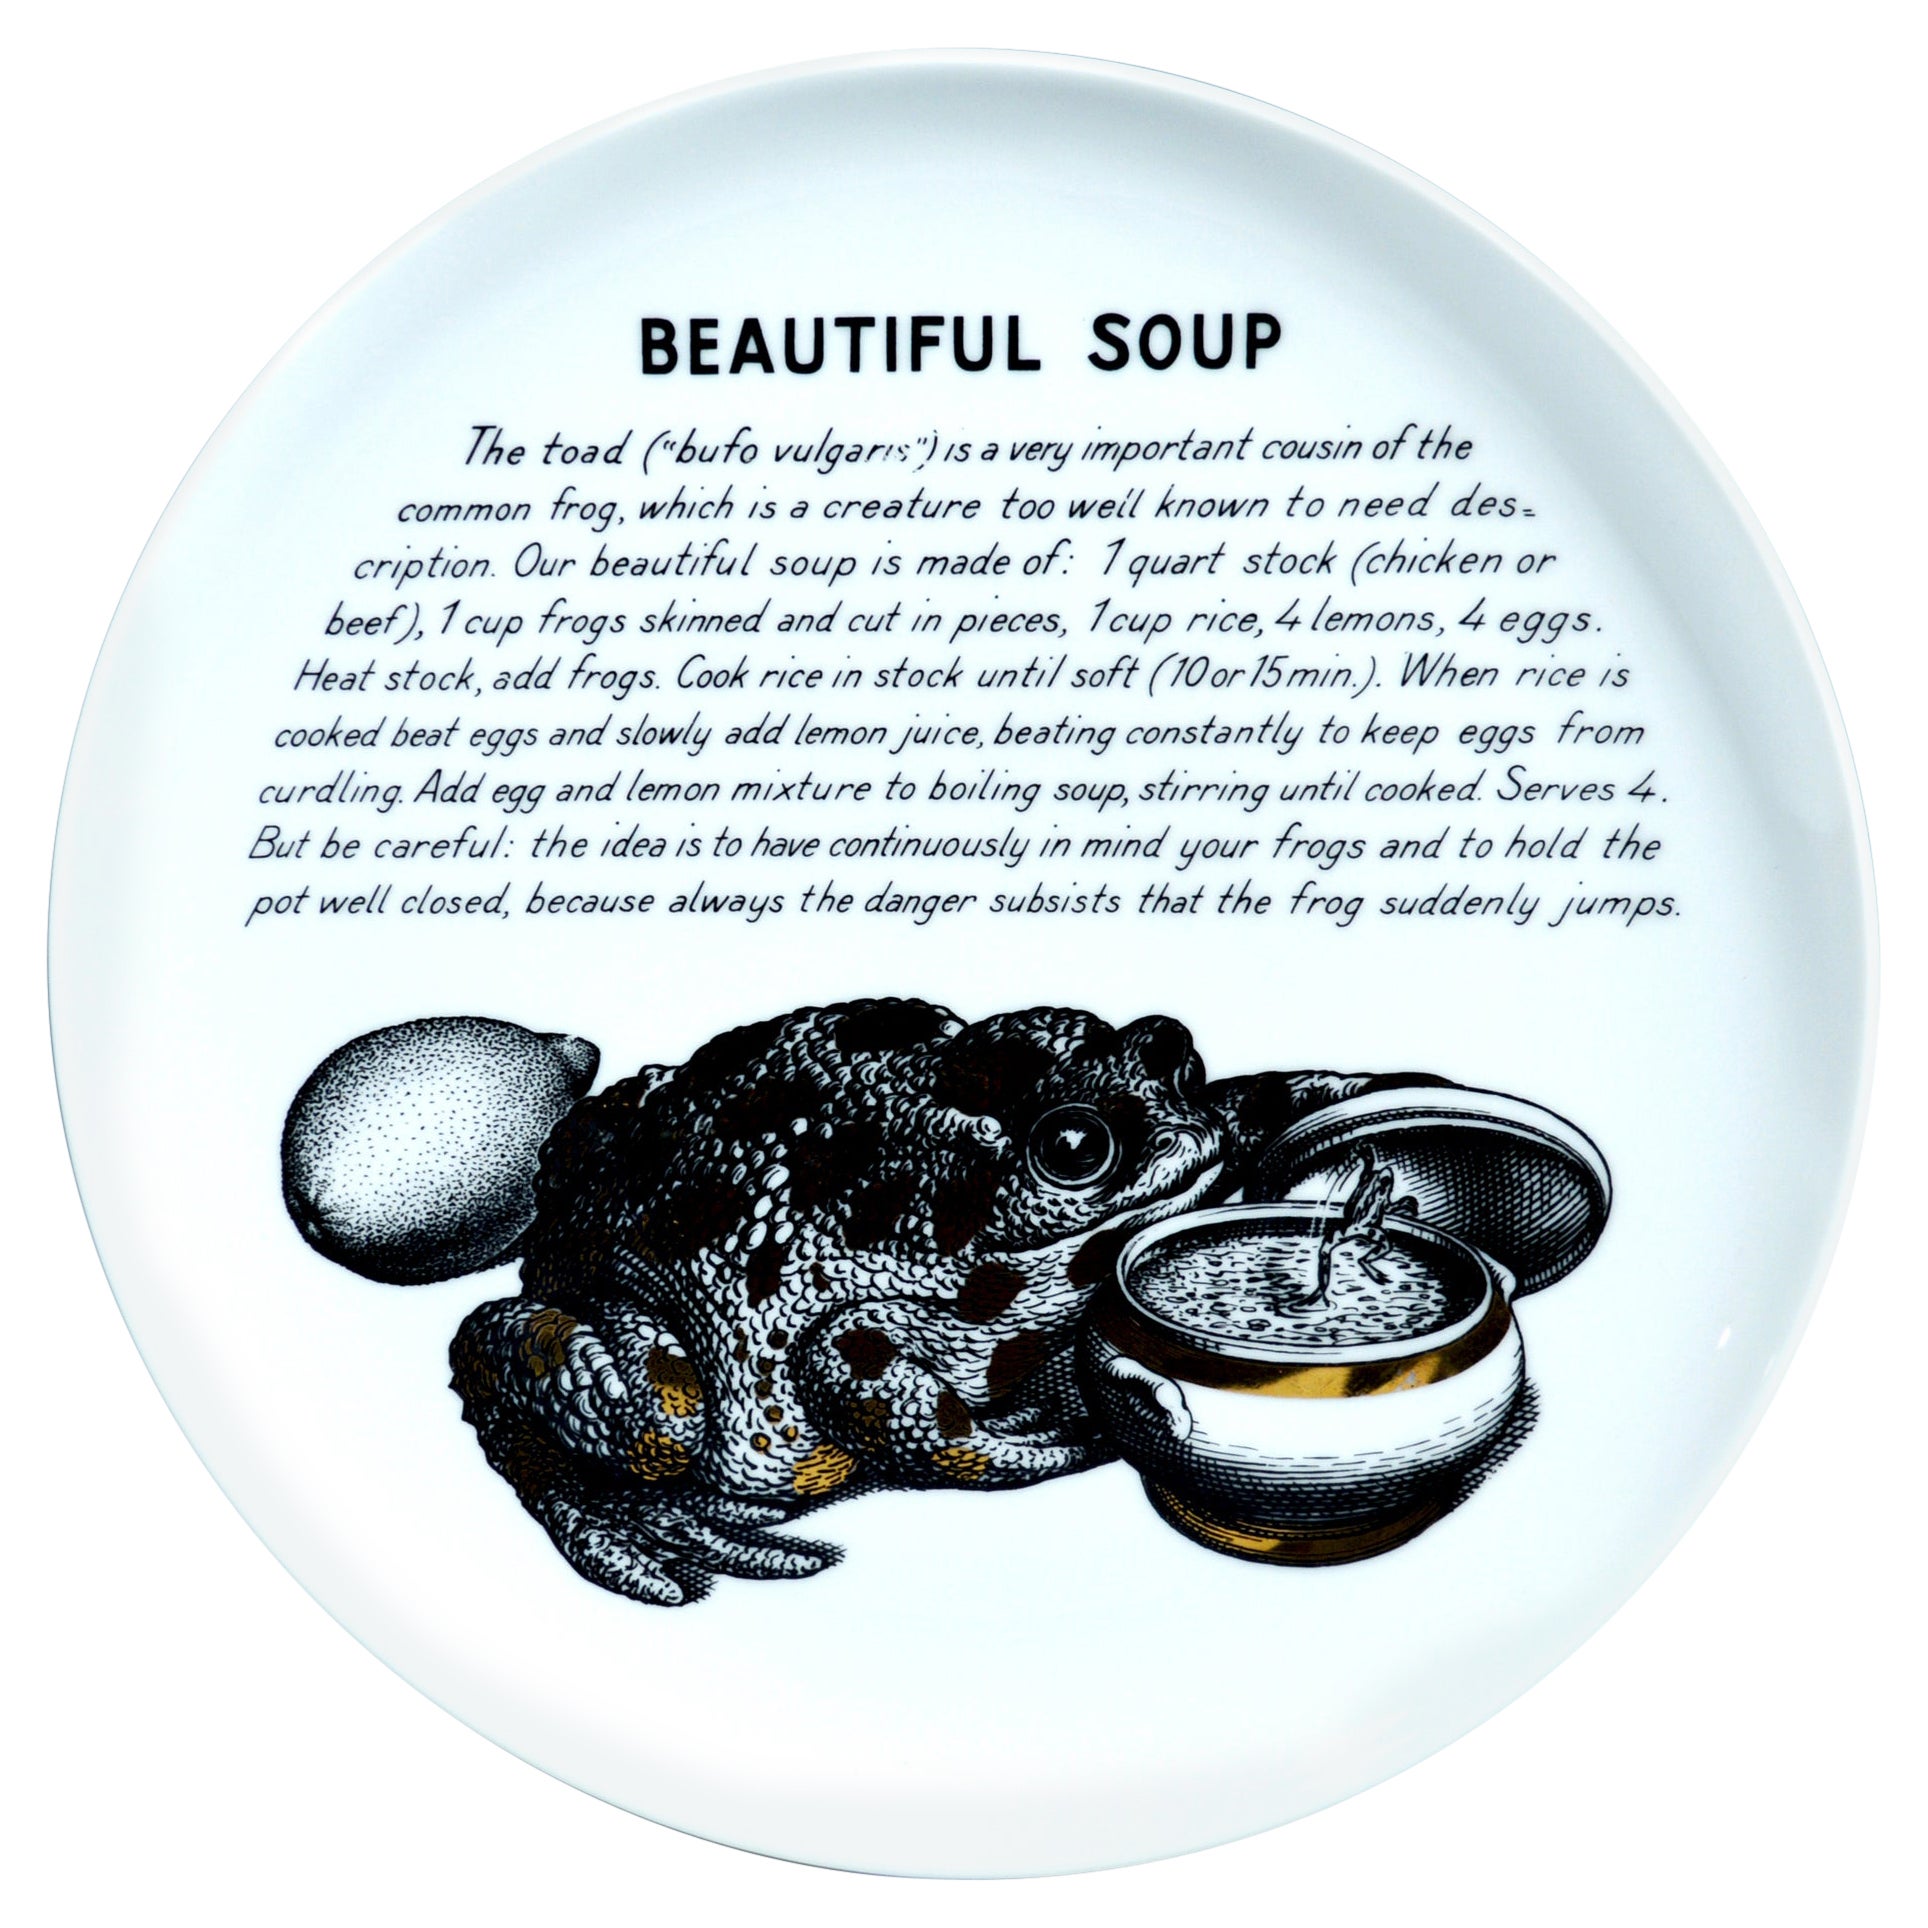 Piero Fornasetti Porcelain Recipe Plate, Beautiful Soup, Made for Fleming Joffe